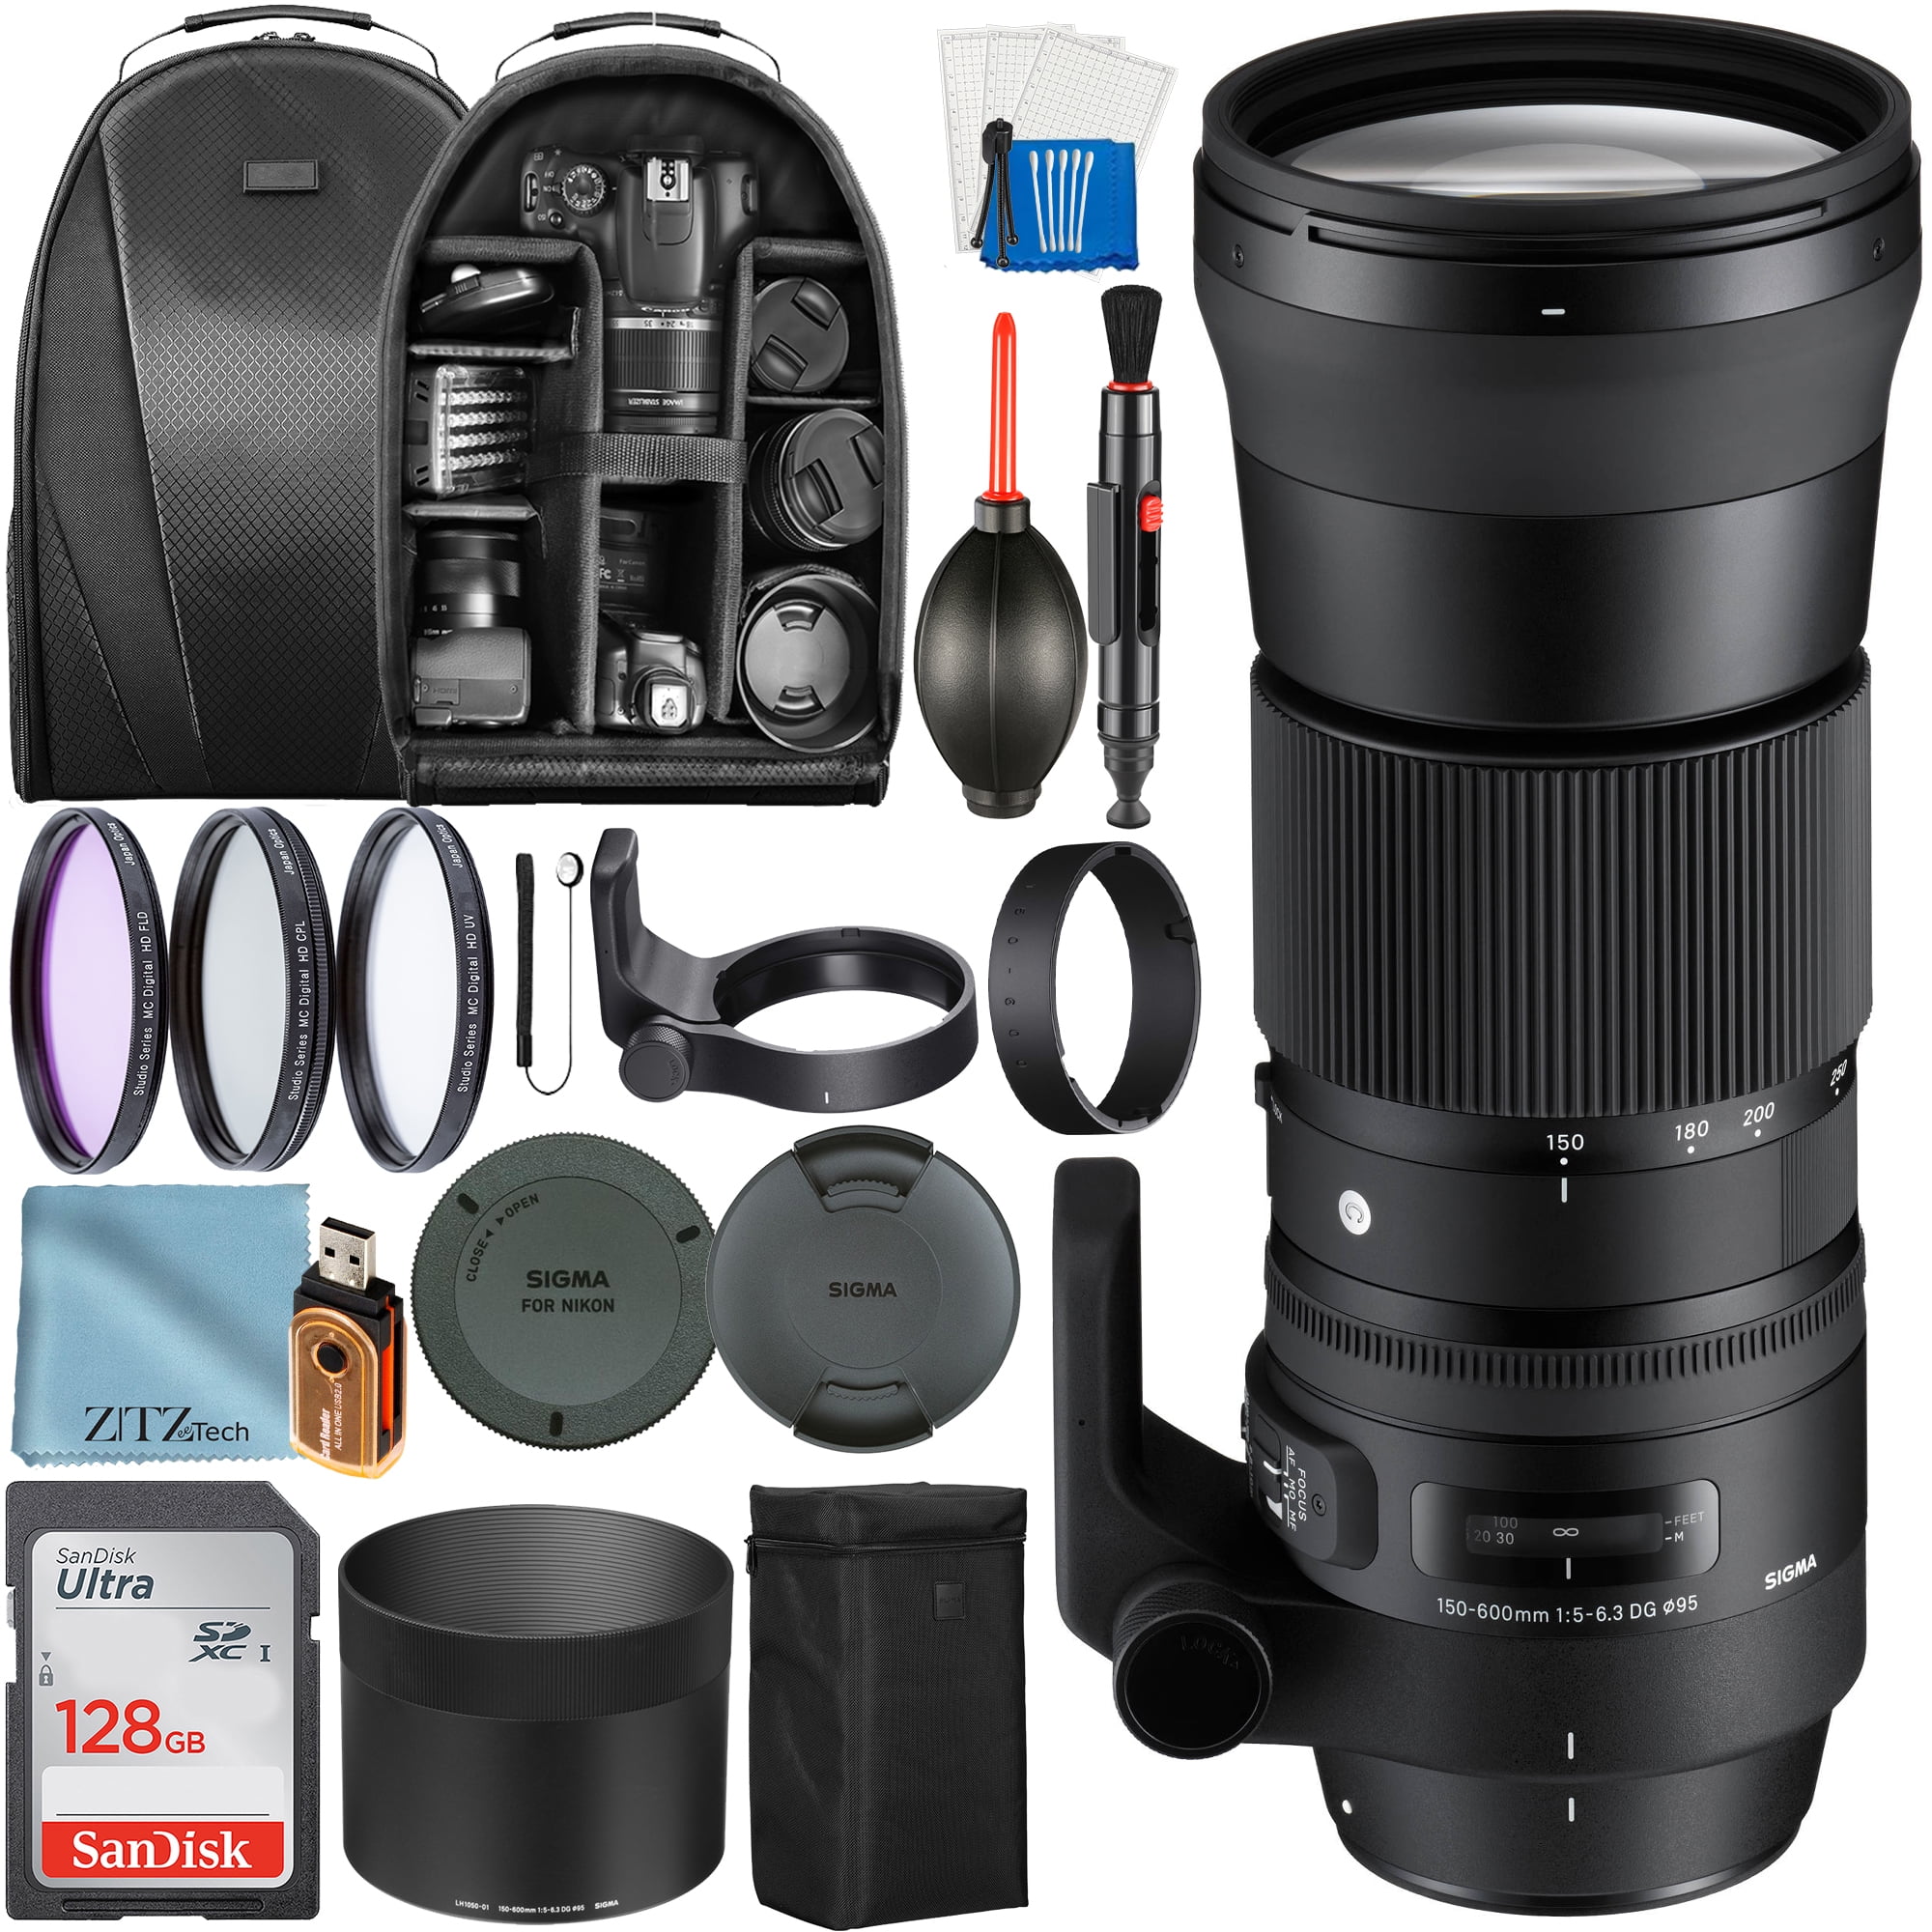 Sigma 150-600mm f/5-6.3 DG OS HSM Contemporary Lens for Nikon F with  SanDisk 128GB Card + Case + Filter + ZeeTech Accessory